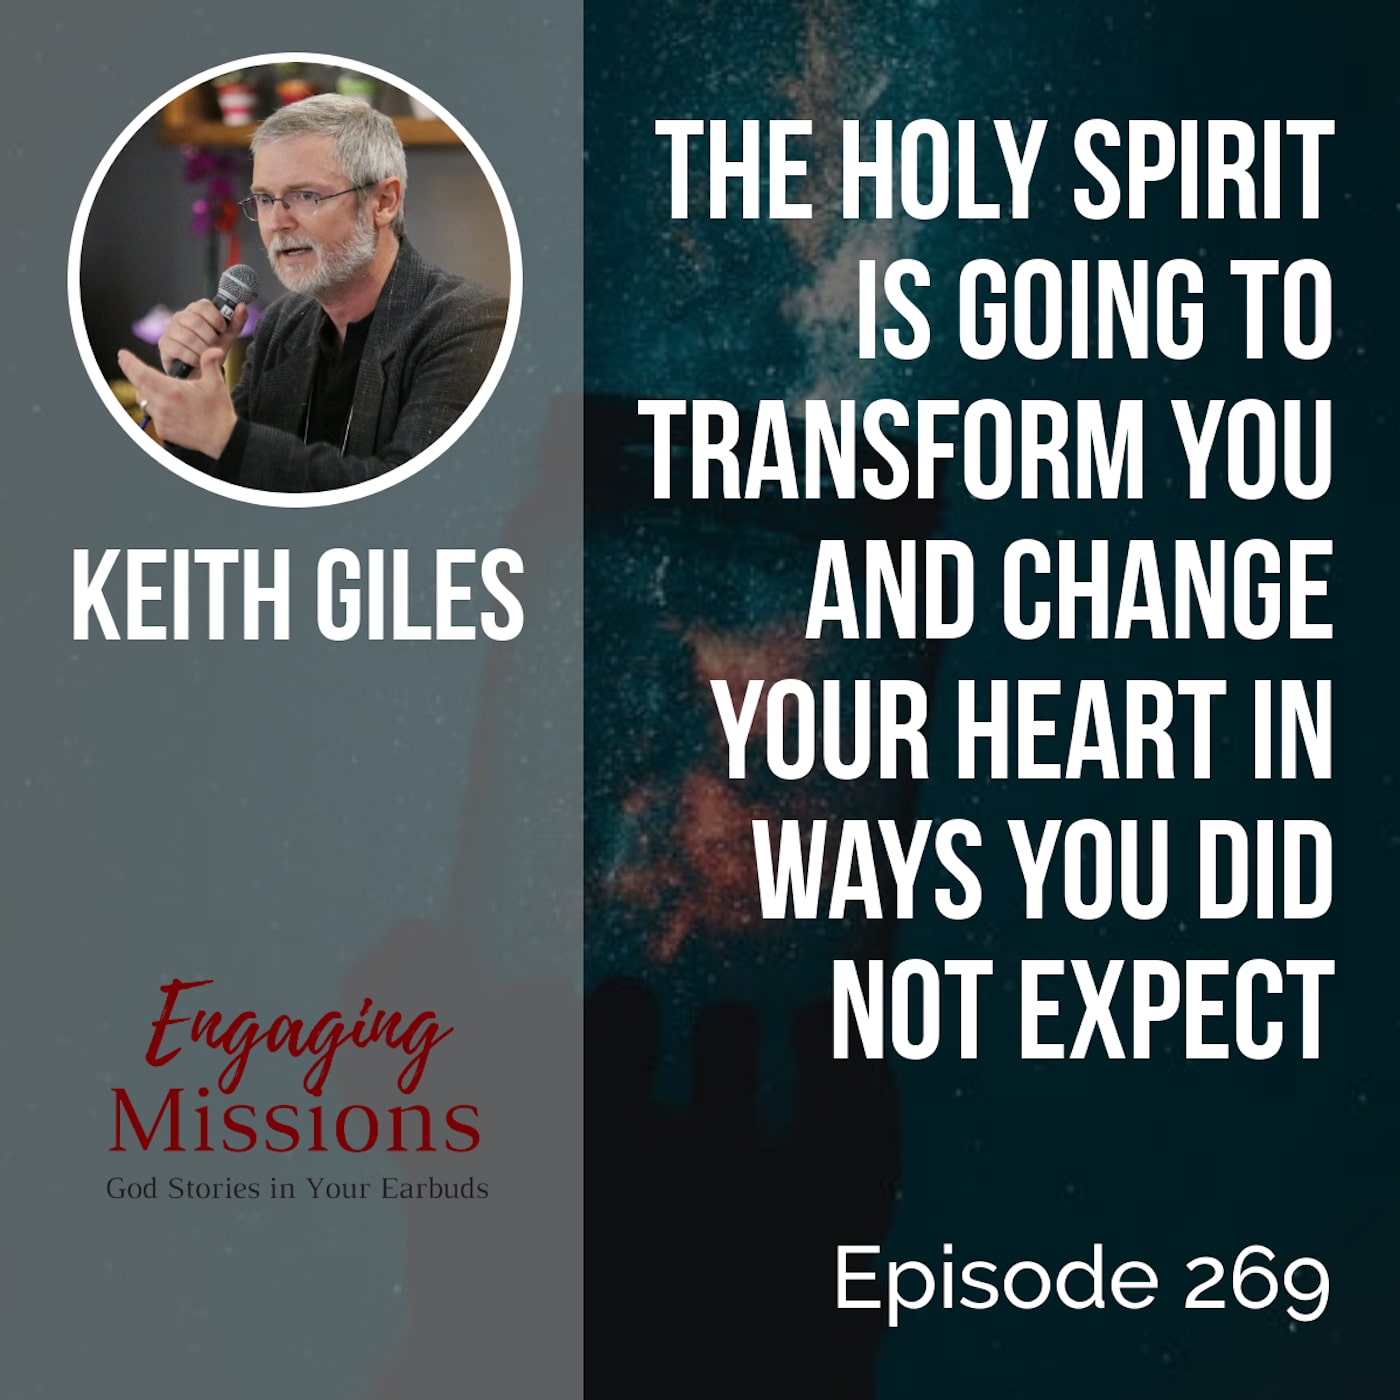 When Offerings Have a Face: How to Love the Poor, with Keith Giles – EM269